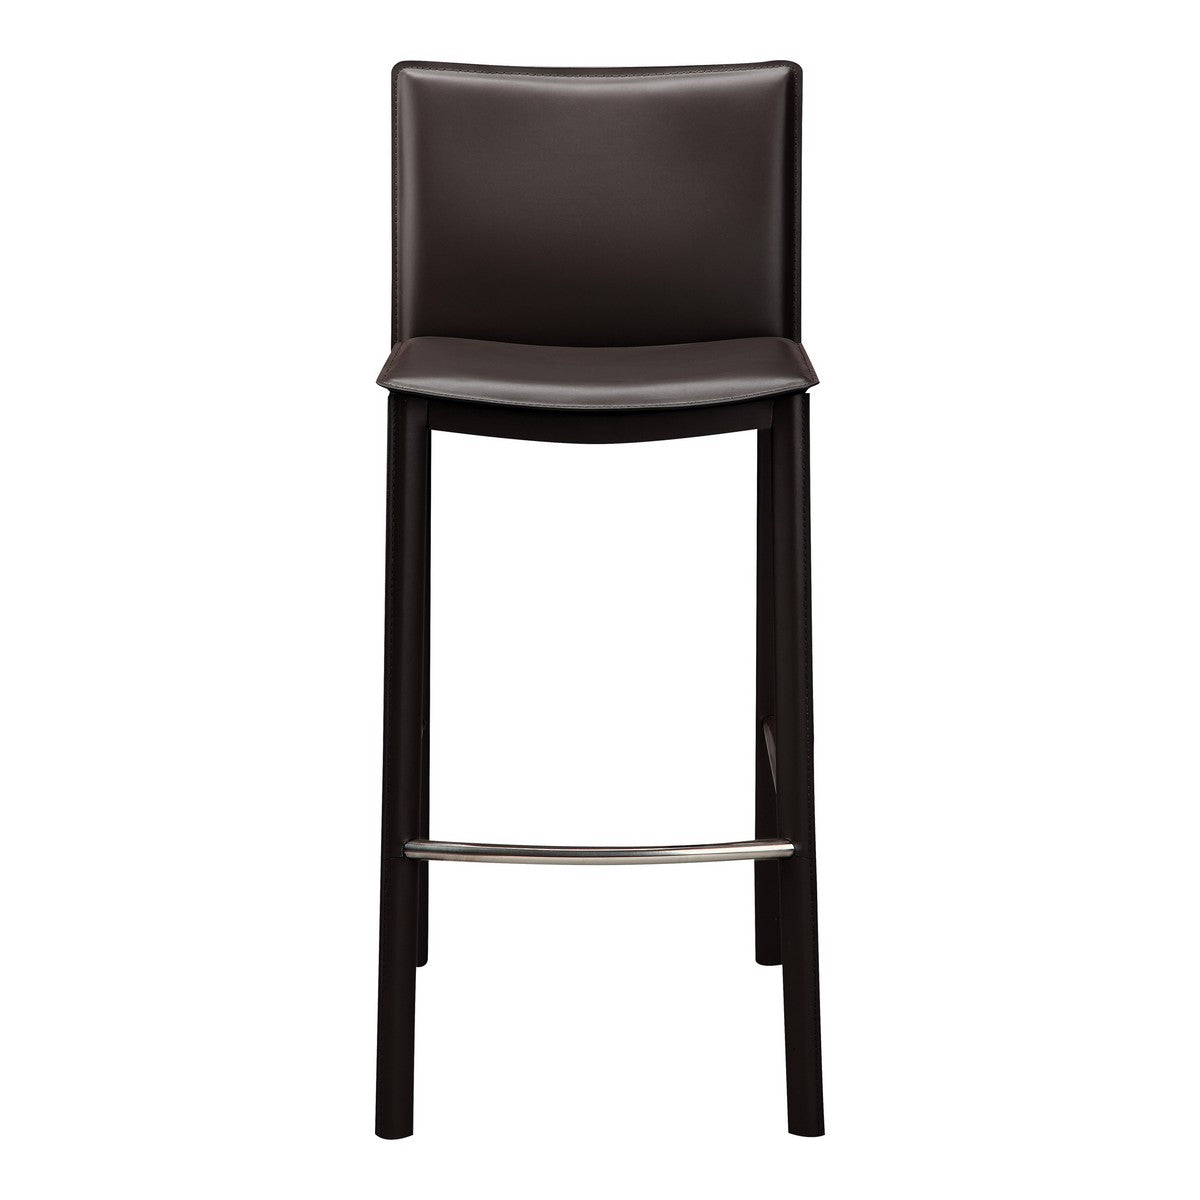 Moe's Home Collection Panca Counter Stool 26" Dark Brown - EH-1034-20 - Moe's Home Collection - Counter Stools - Minimal And Modern - 1